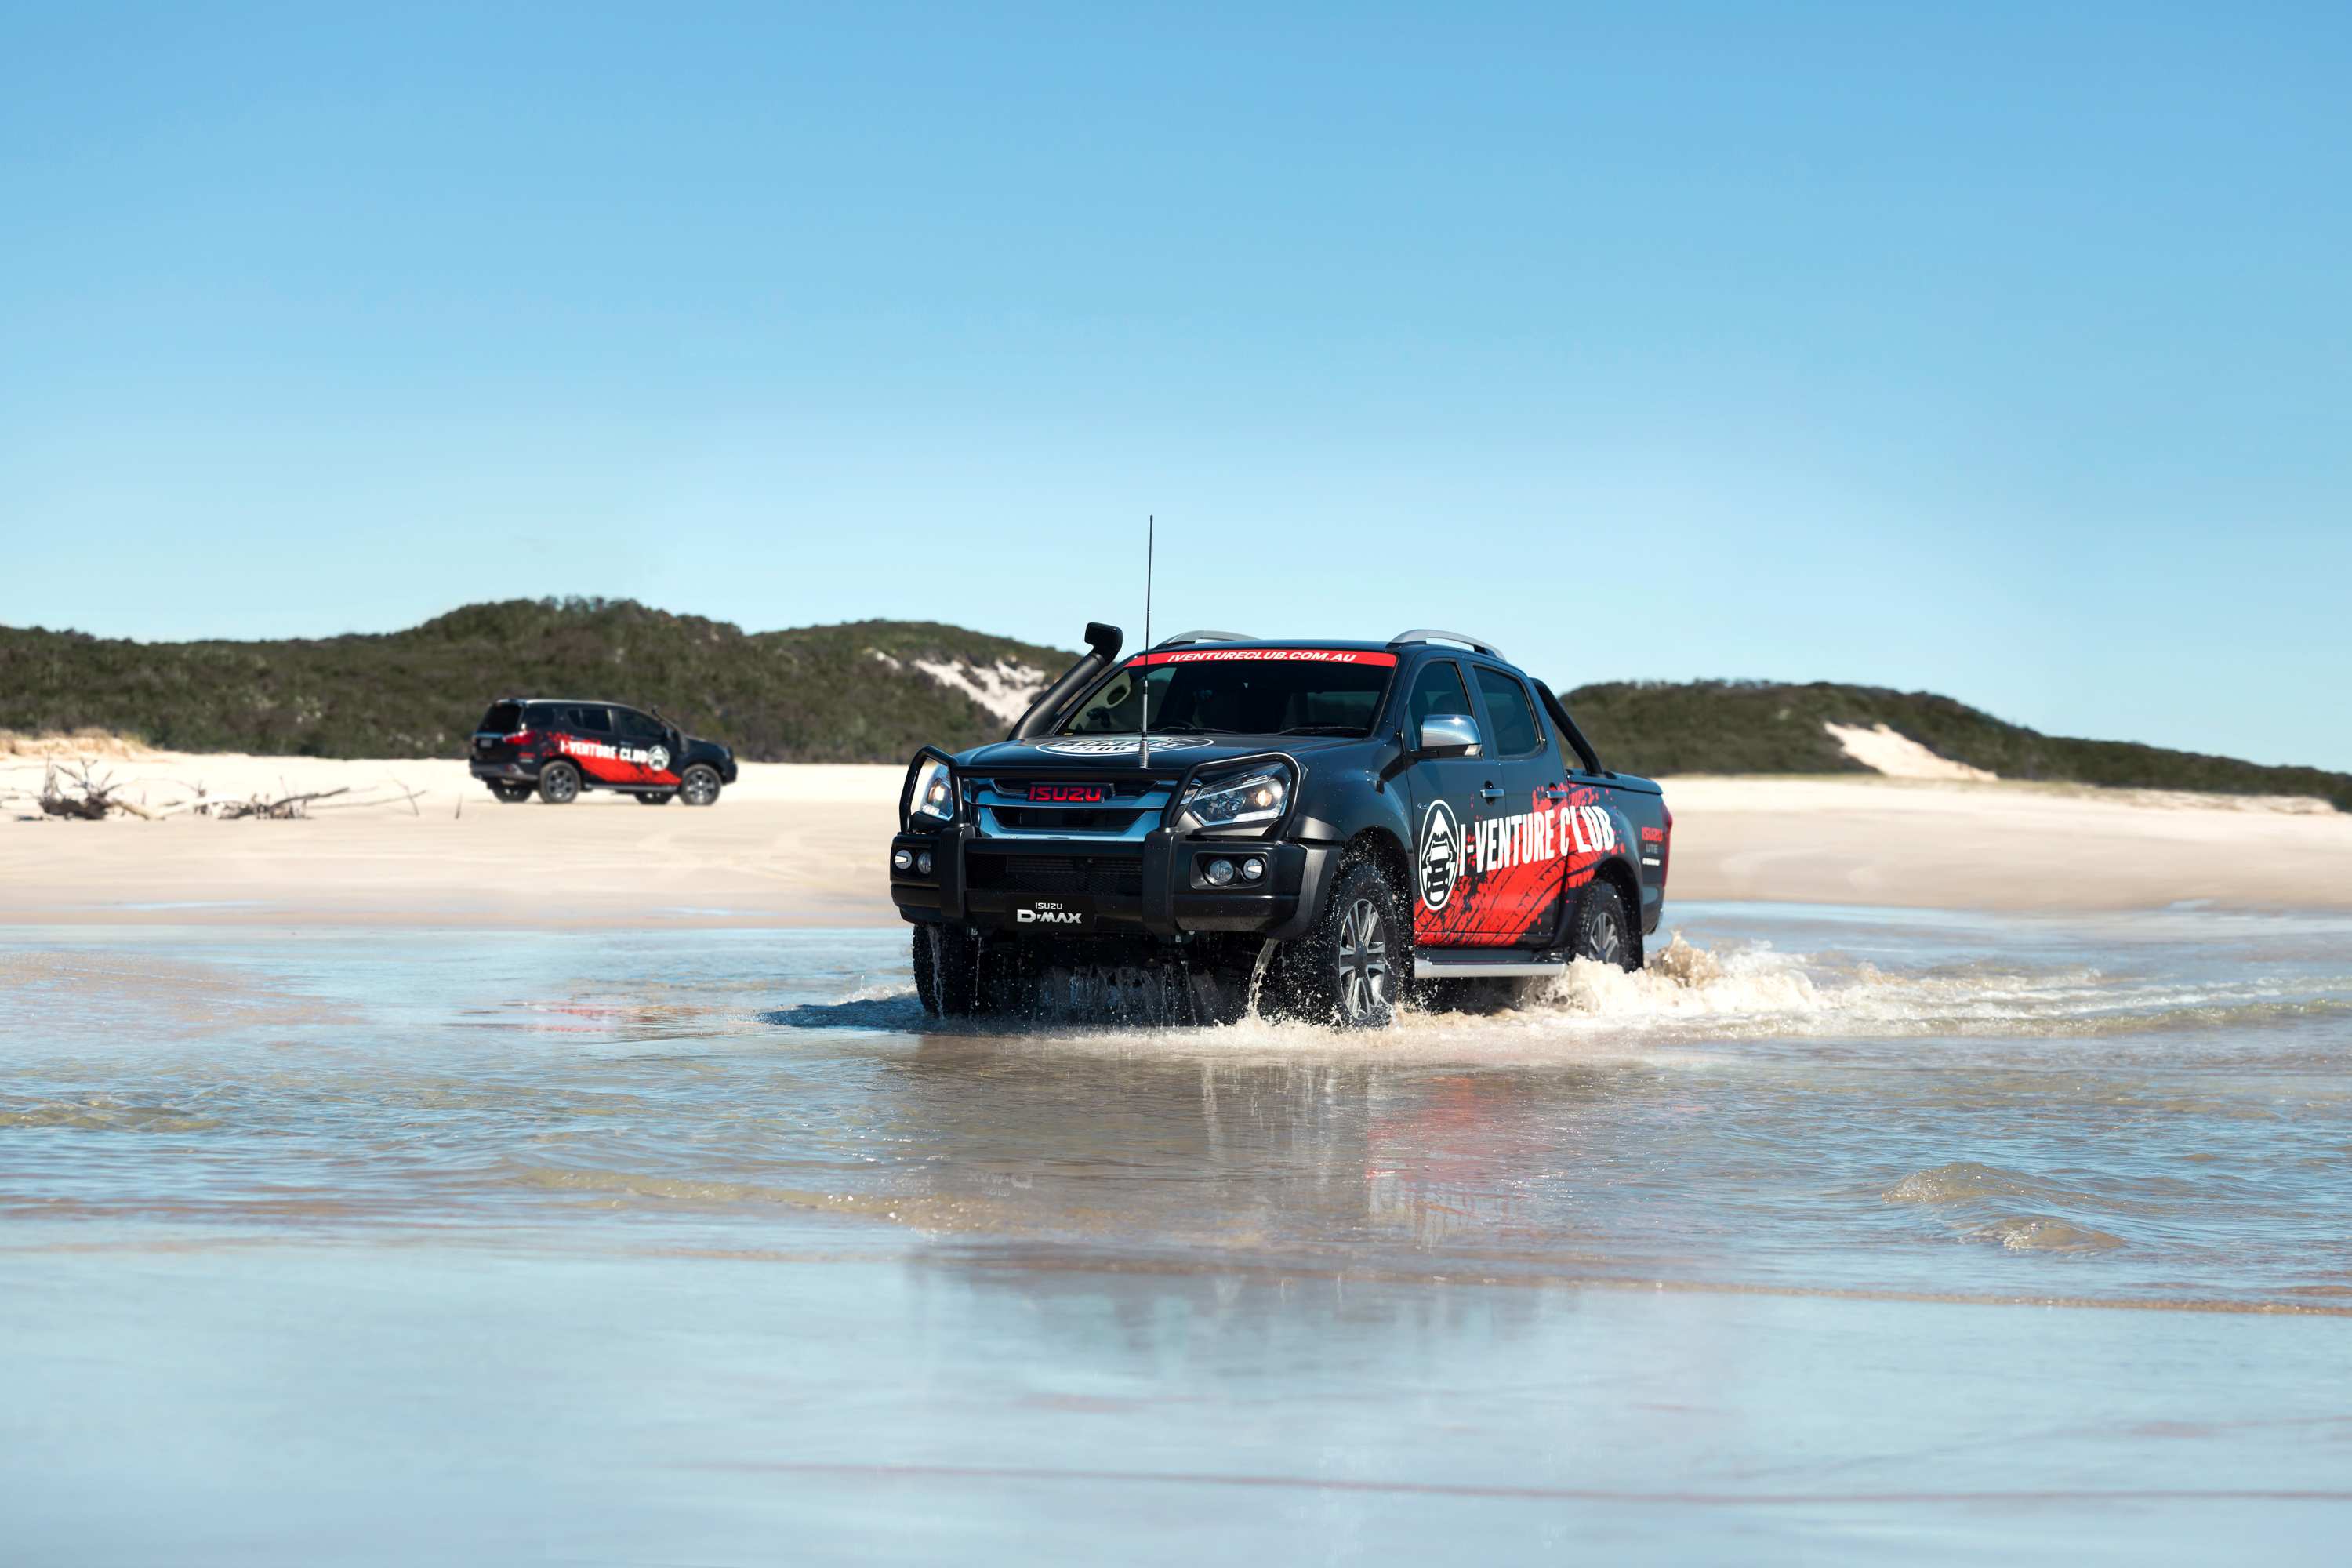 Isuzu D-MAX and MU-X drivers across the country actively continue to engage with Australia's only vehicle manufacturer initiative of its kind that incorporates driver training days and extended training tours throughout the year—further enabling Isuzu owners to Go Their Own Way under the guidance of accredited 4x4 instructors.